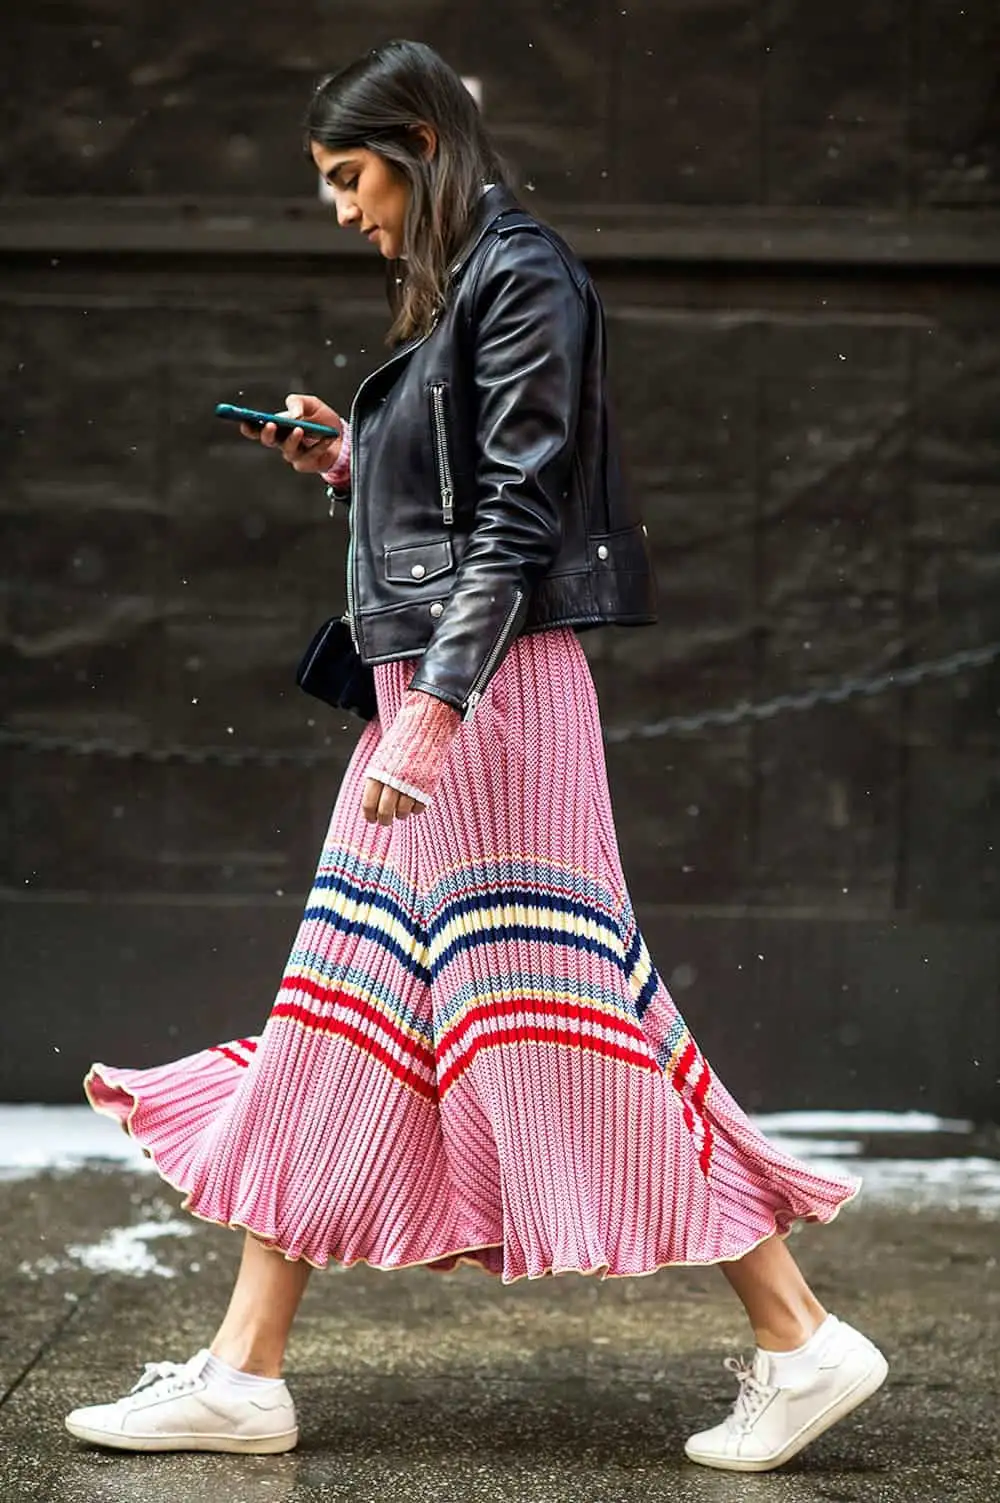 Rock Your Style With Pink and Black Outfit - 8 Perfect Ideas for a Trendy Look